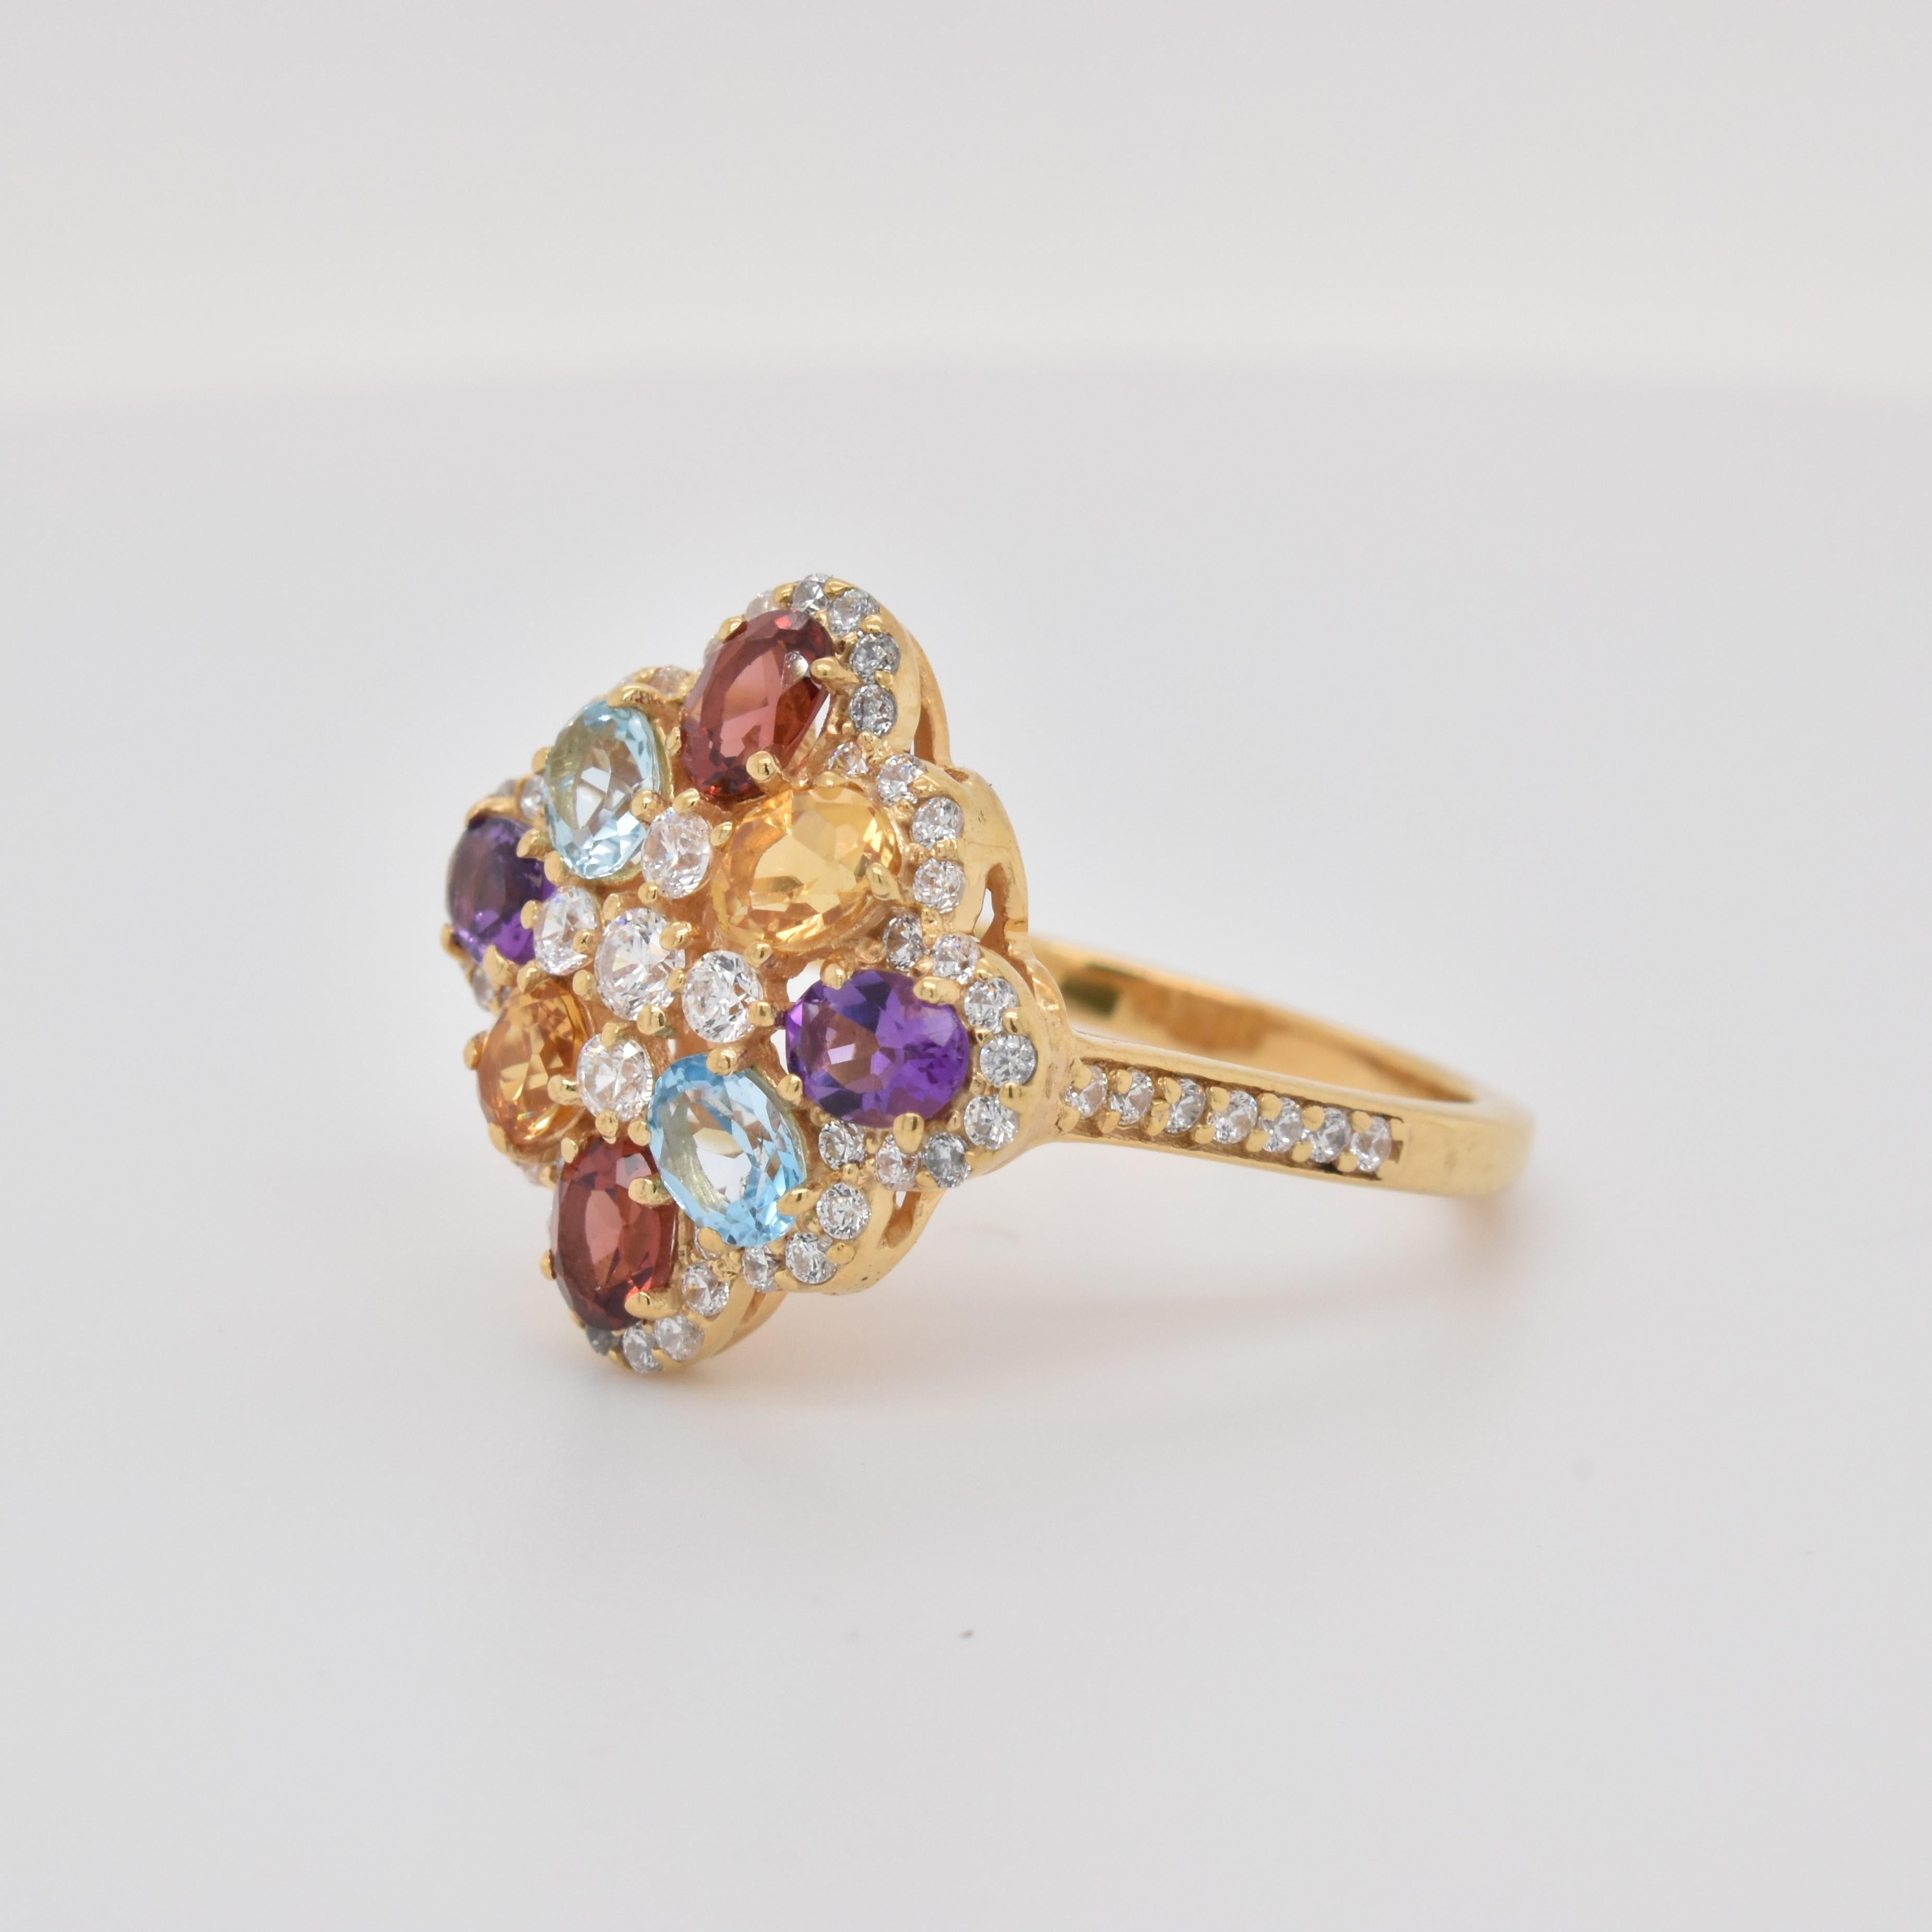 Oval Shape Multi Colored Gemstone beautifully crafted with CZ in a Ring. A fiery . For a special occasion like Engagement or Proposal or may be as a gift for a special person.

Primary Stone Size - 4x3mm